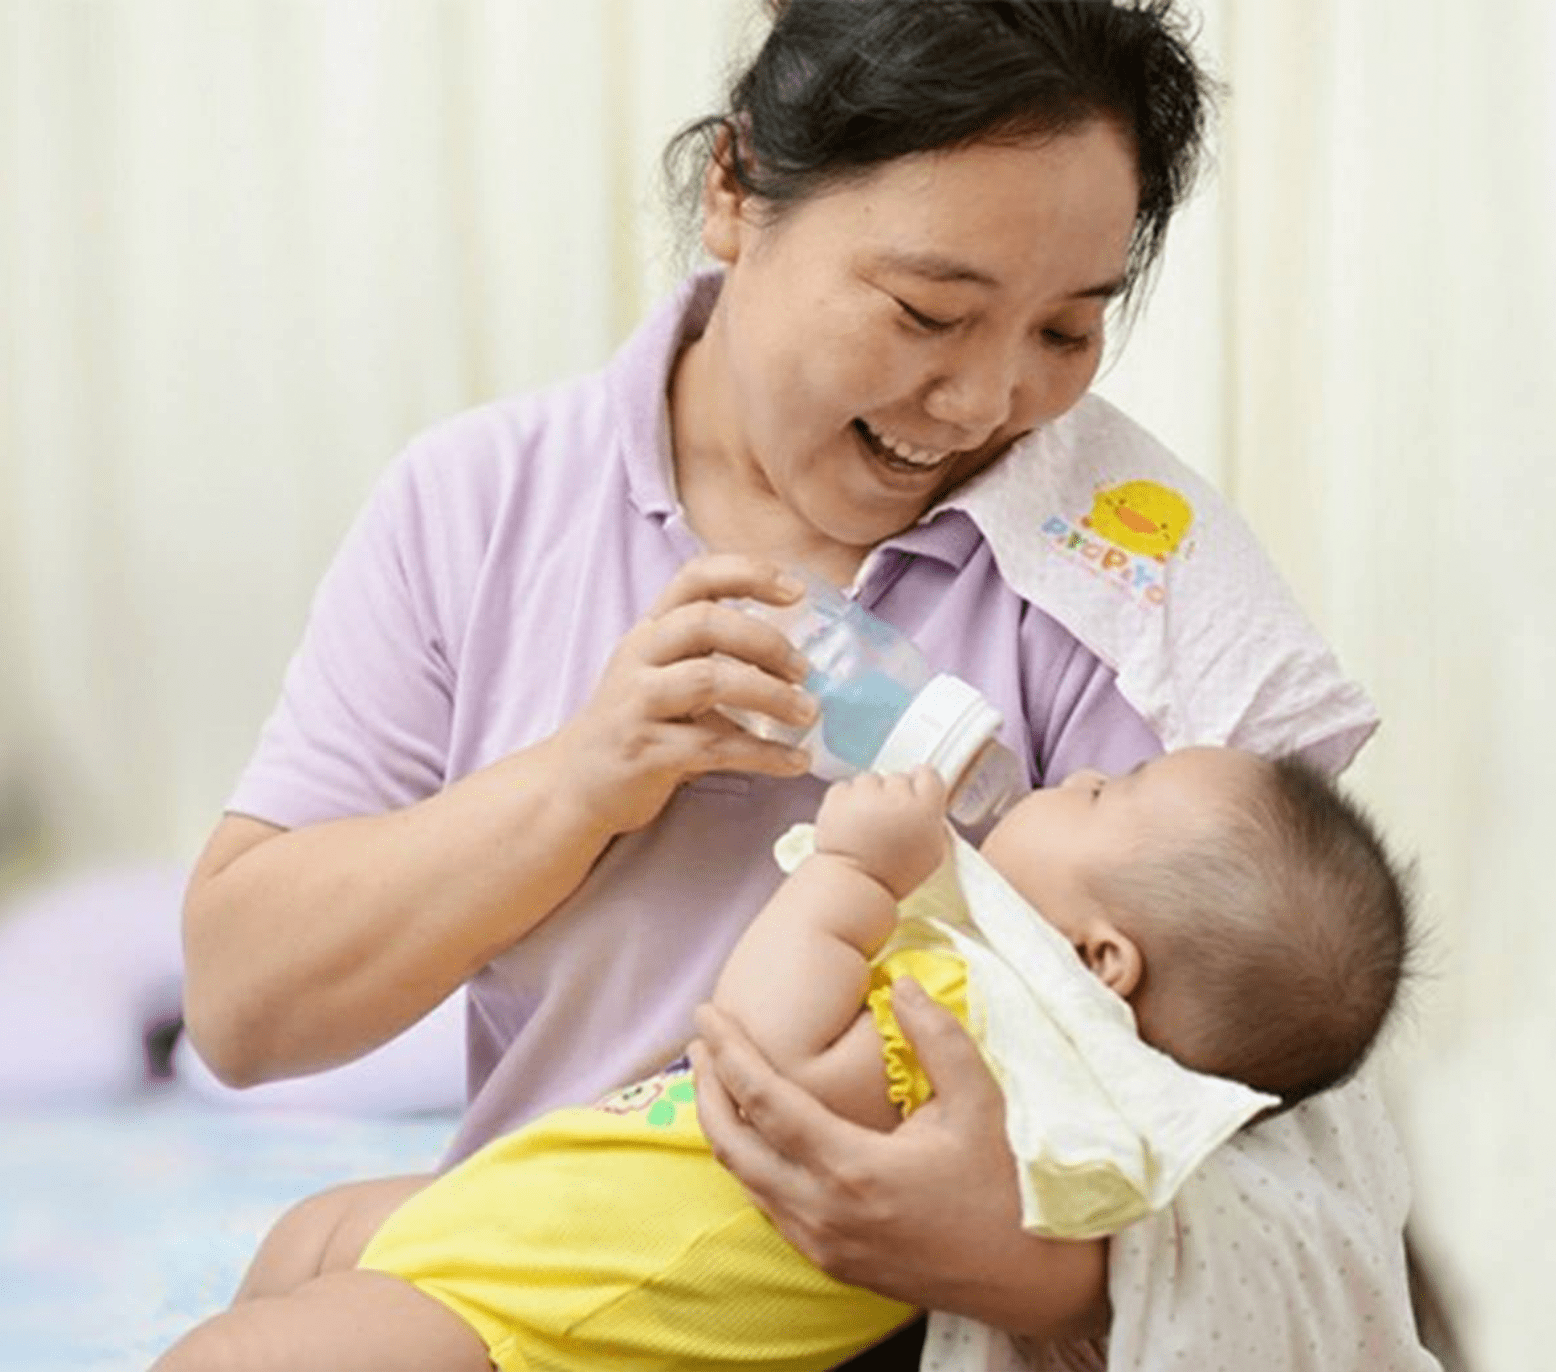 SOS Nanny confinement services in Singapore